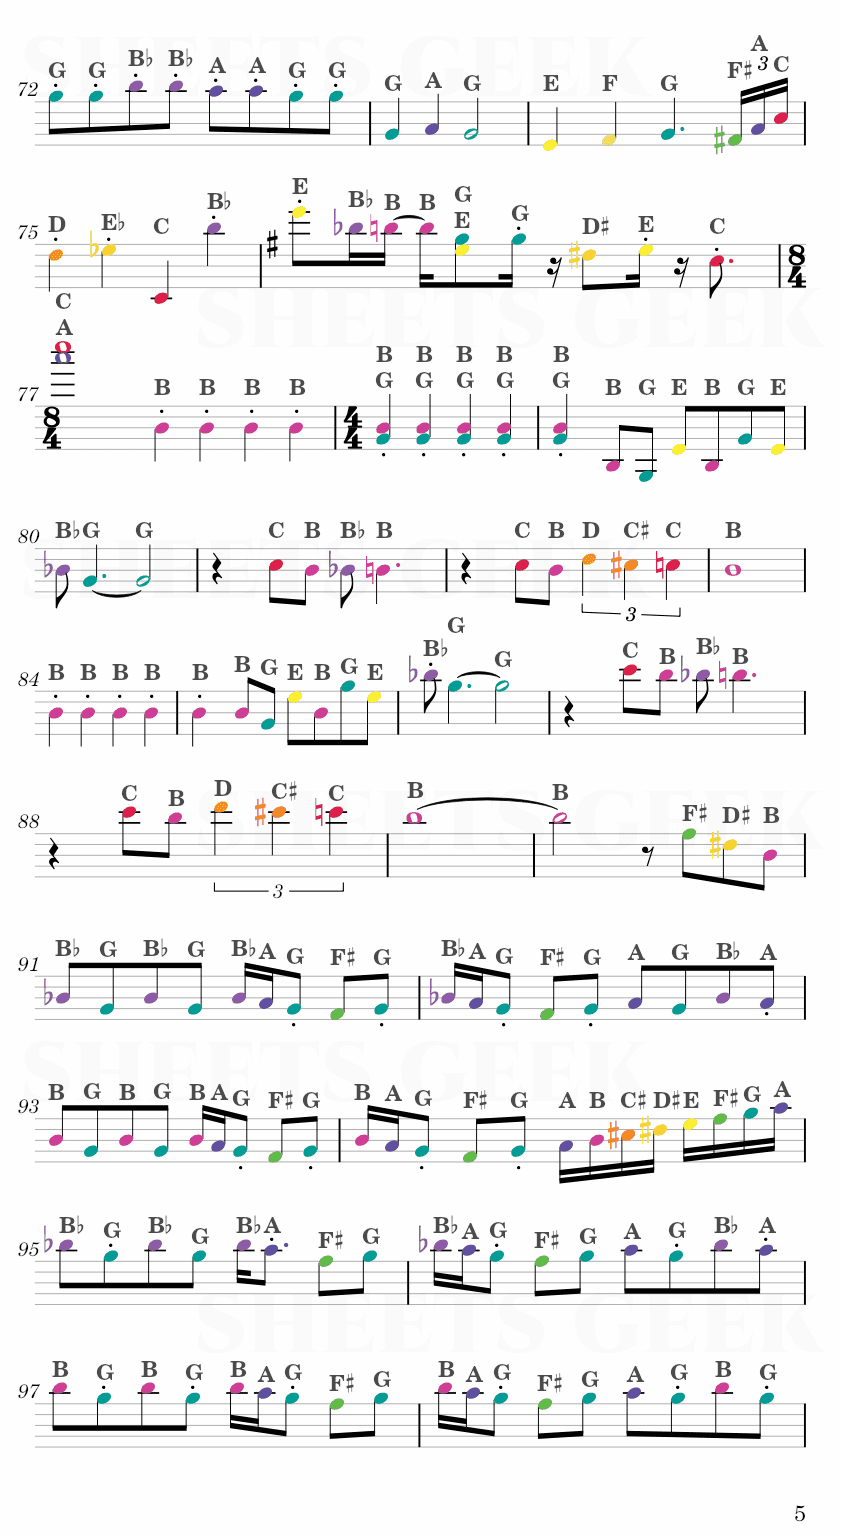 One Winged Angel - Final Fantasy VII Easy Sheet Music Free for piano, keyboard, flute, violin, sax, cello page 5